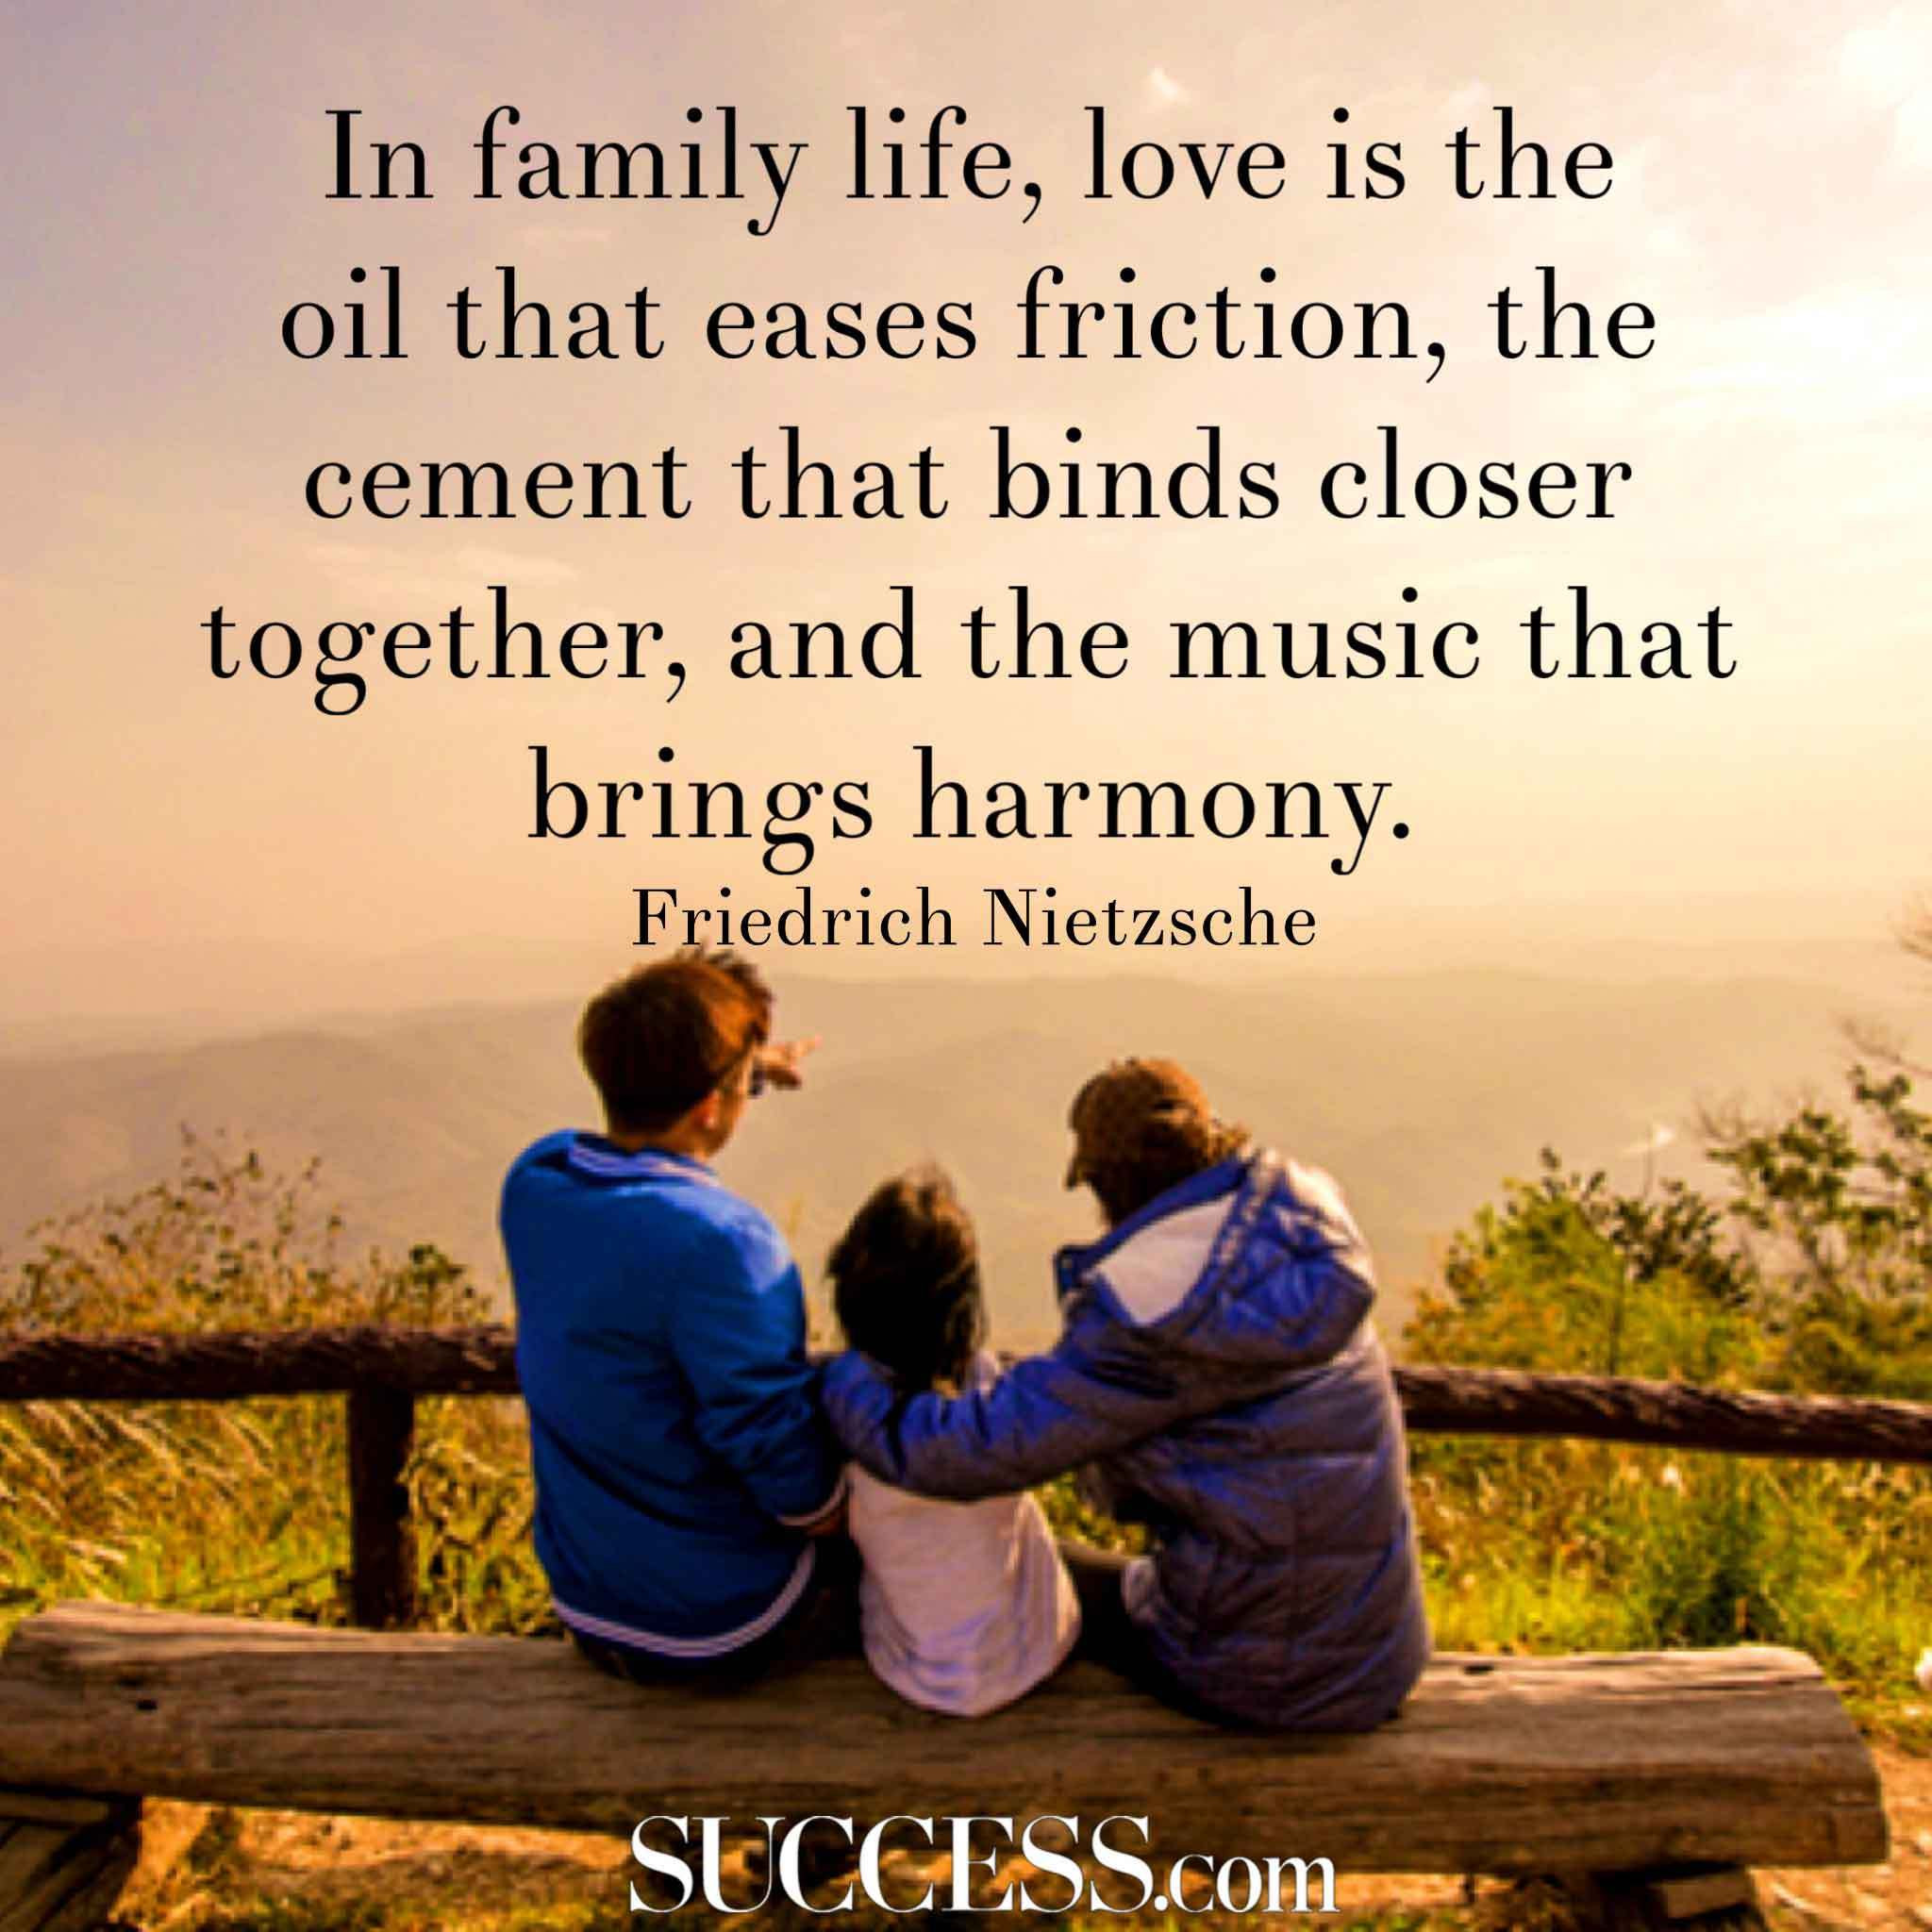 Quotes About Love And Family
 14 Loving Quotes About Family